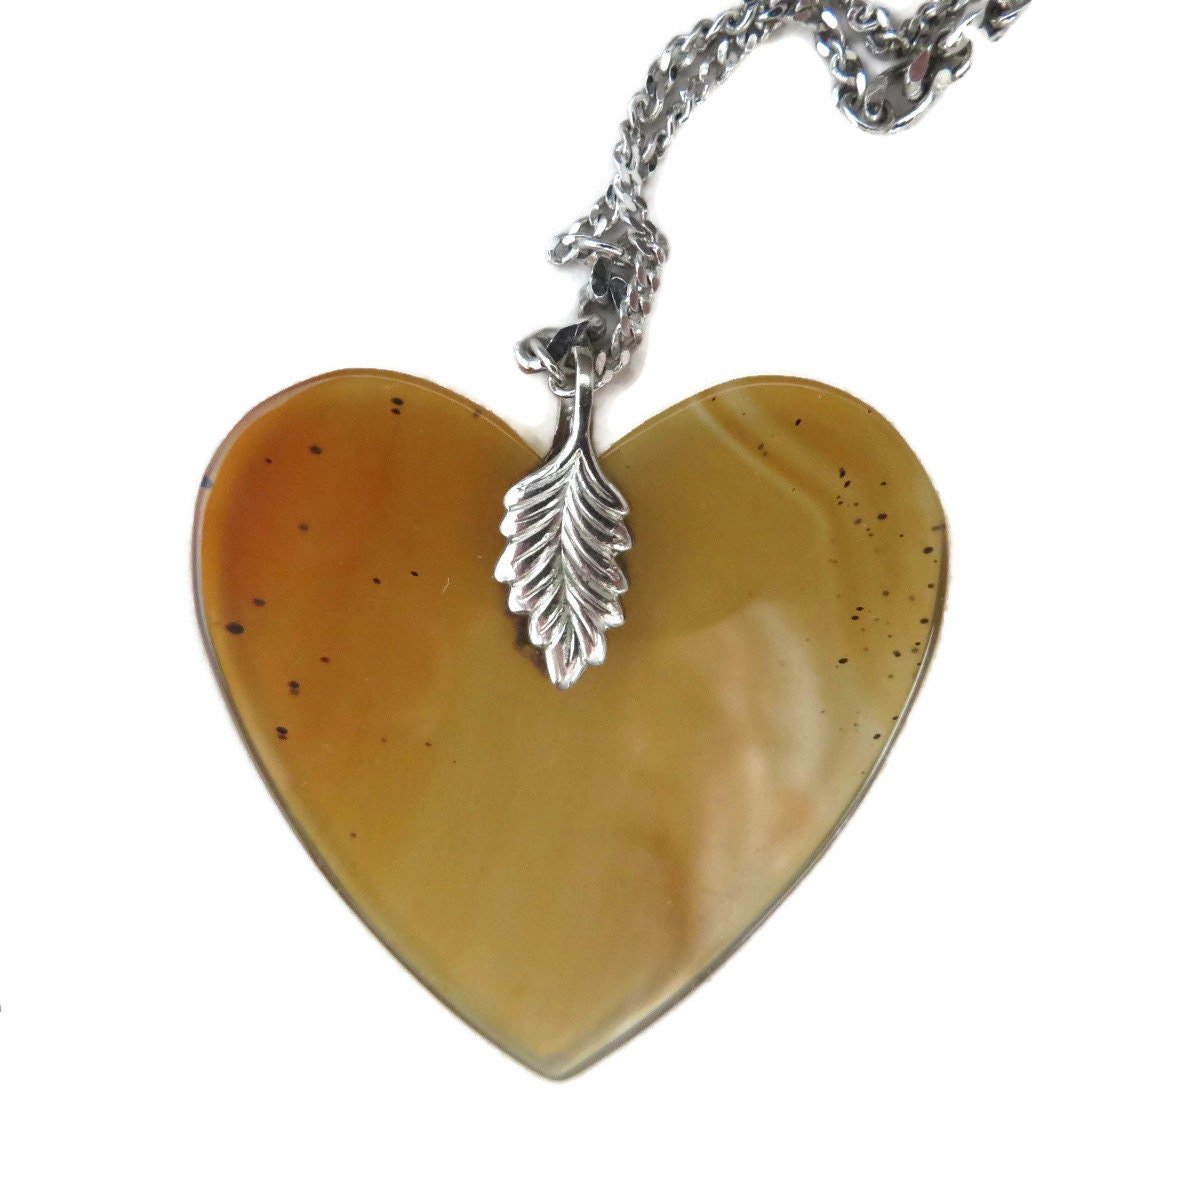 Agate Heart Pendant Chain Link Necklace